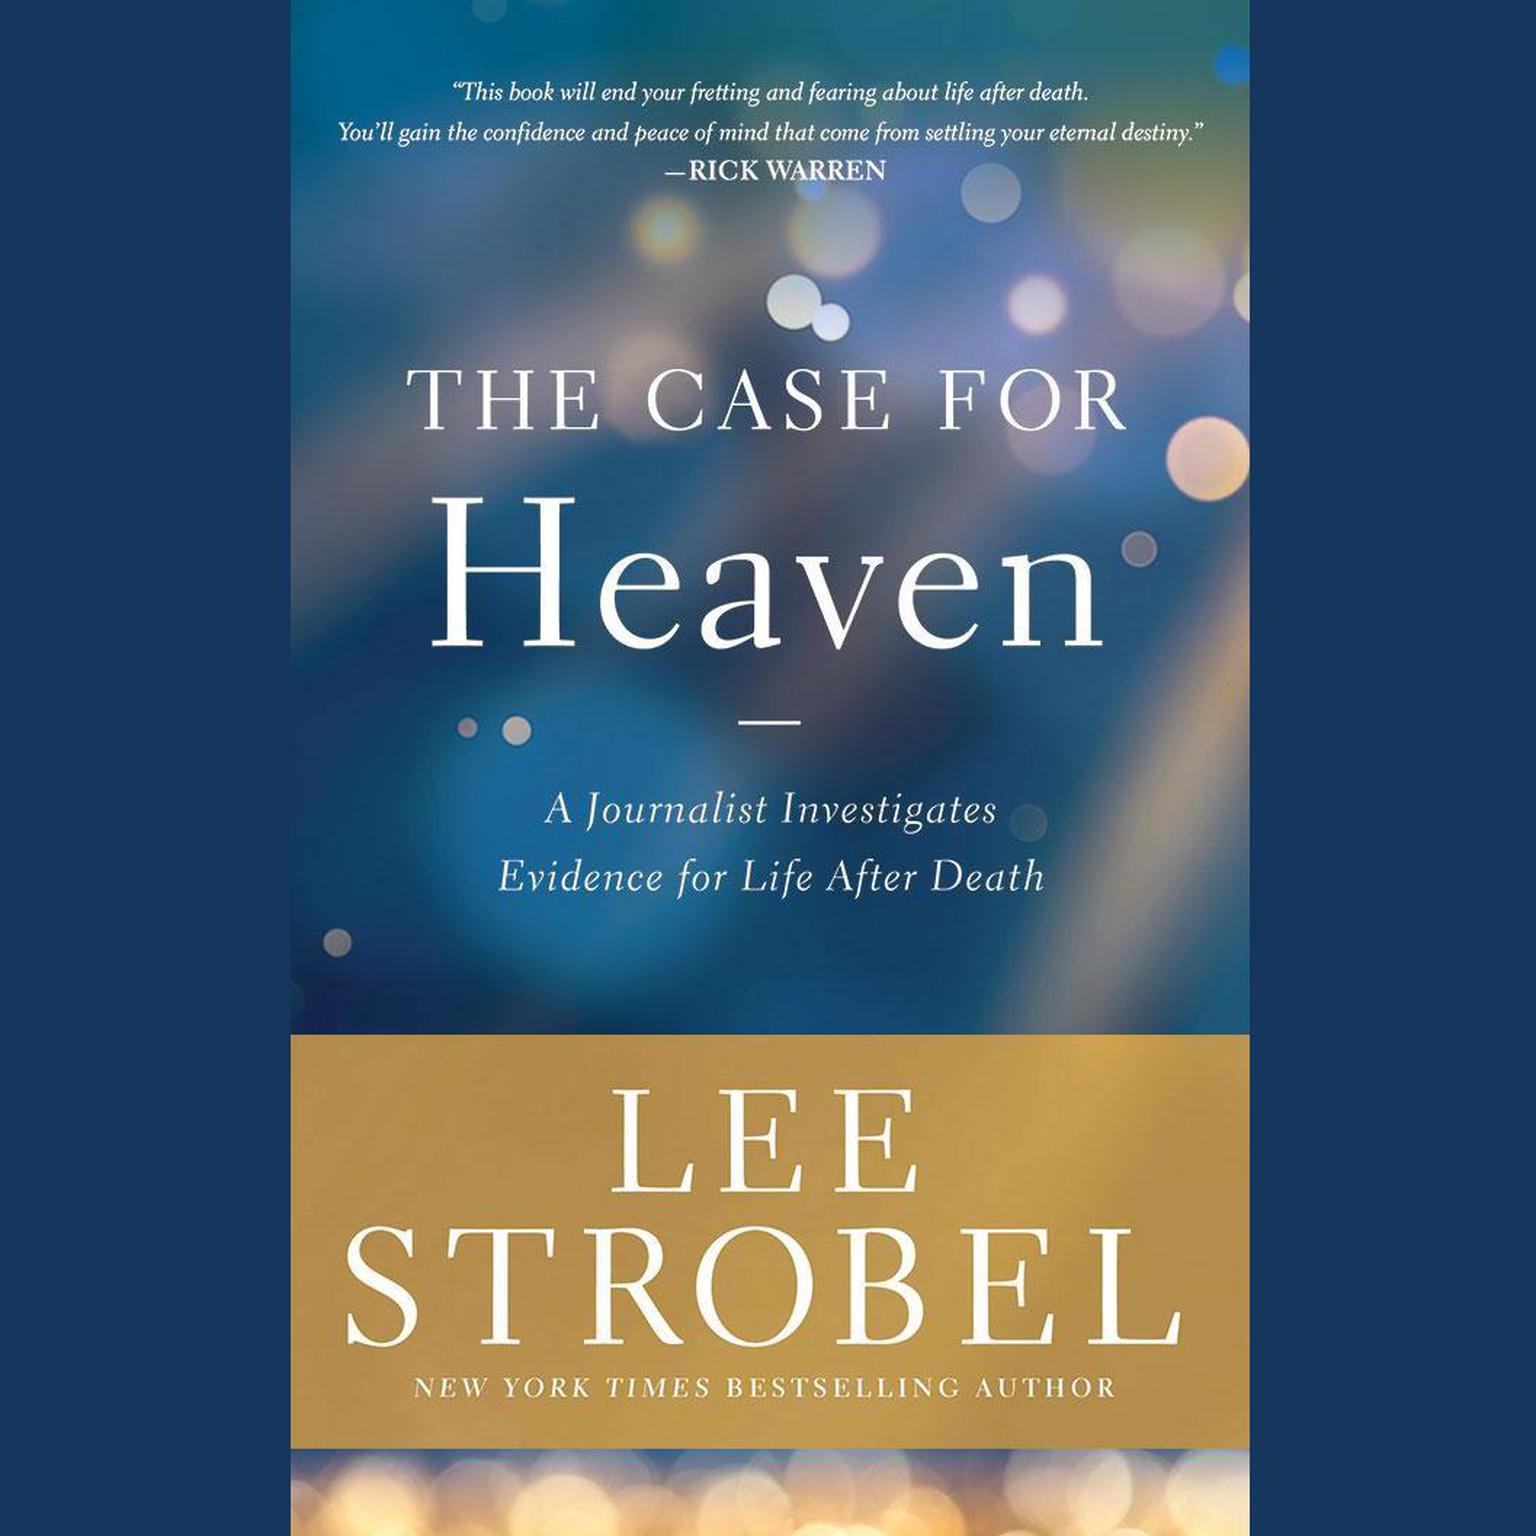 The Case for Heaven: A Journalist Investigates Evidence for Life After Death Audiobook, by Lee Strobel